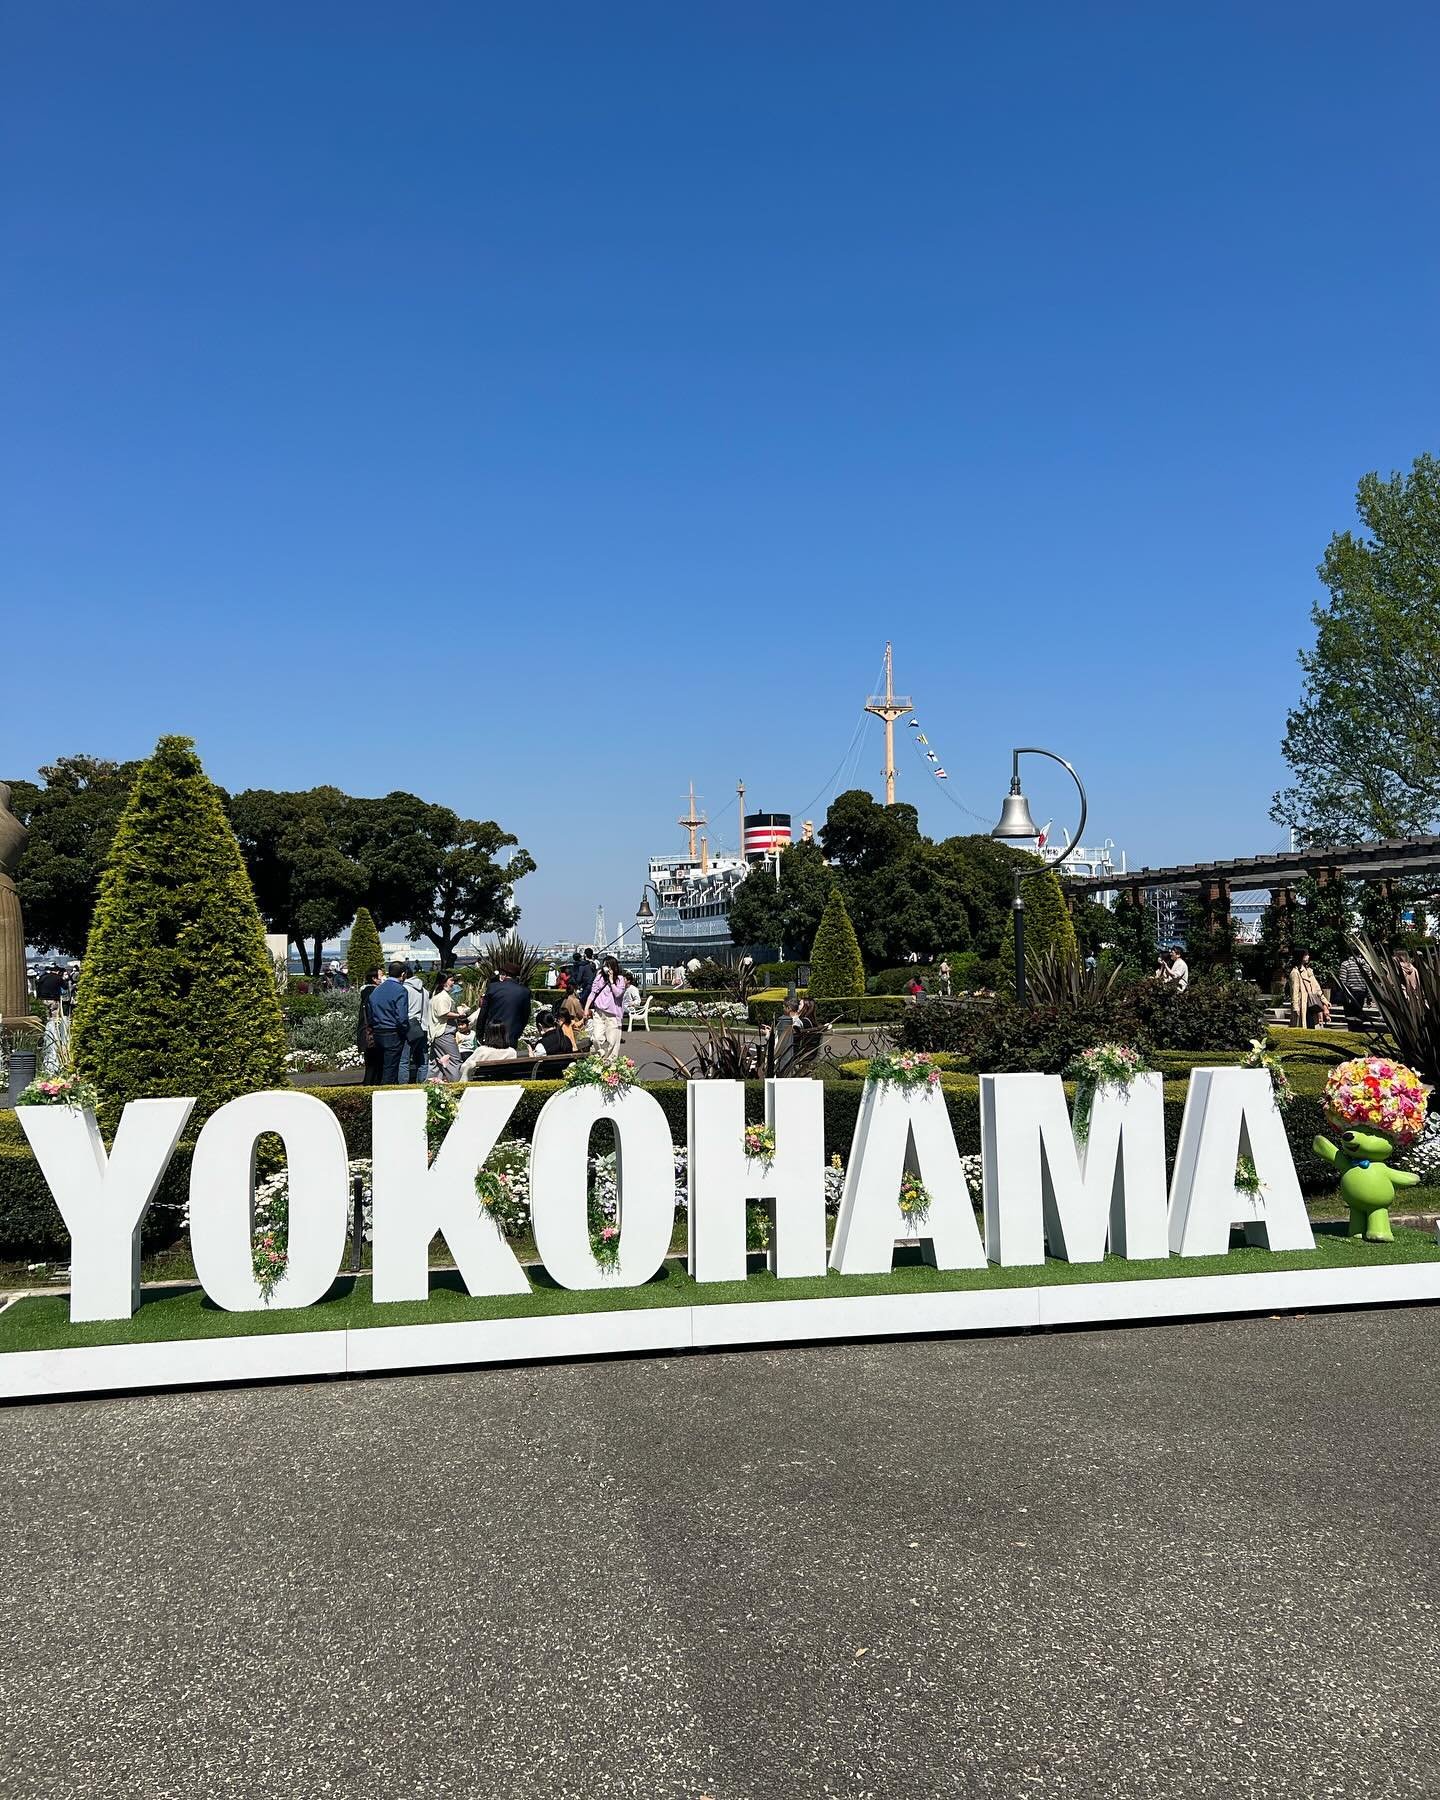 🌷🌺 The yearly Yokohama garden necklace event is back this year! This great event taking place in Yokohama harbor celebrates spring with seasonal flowers highlighted in the different parks around the port. 

🗓️This year, the event is held from Marc